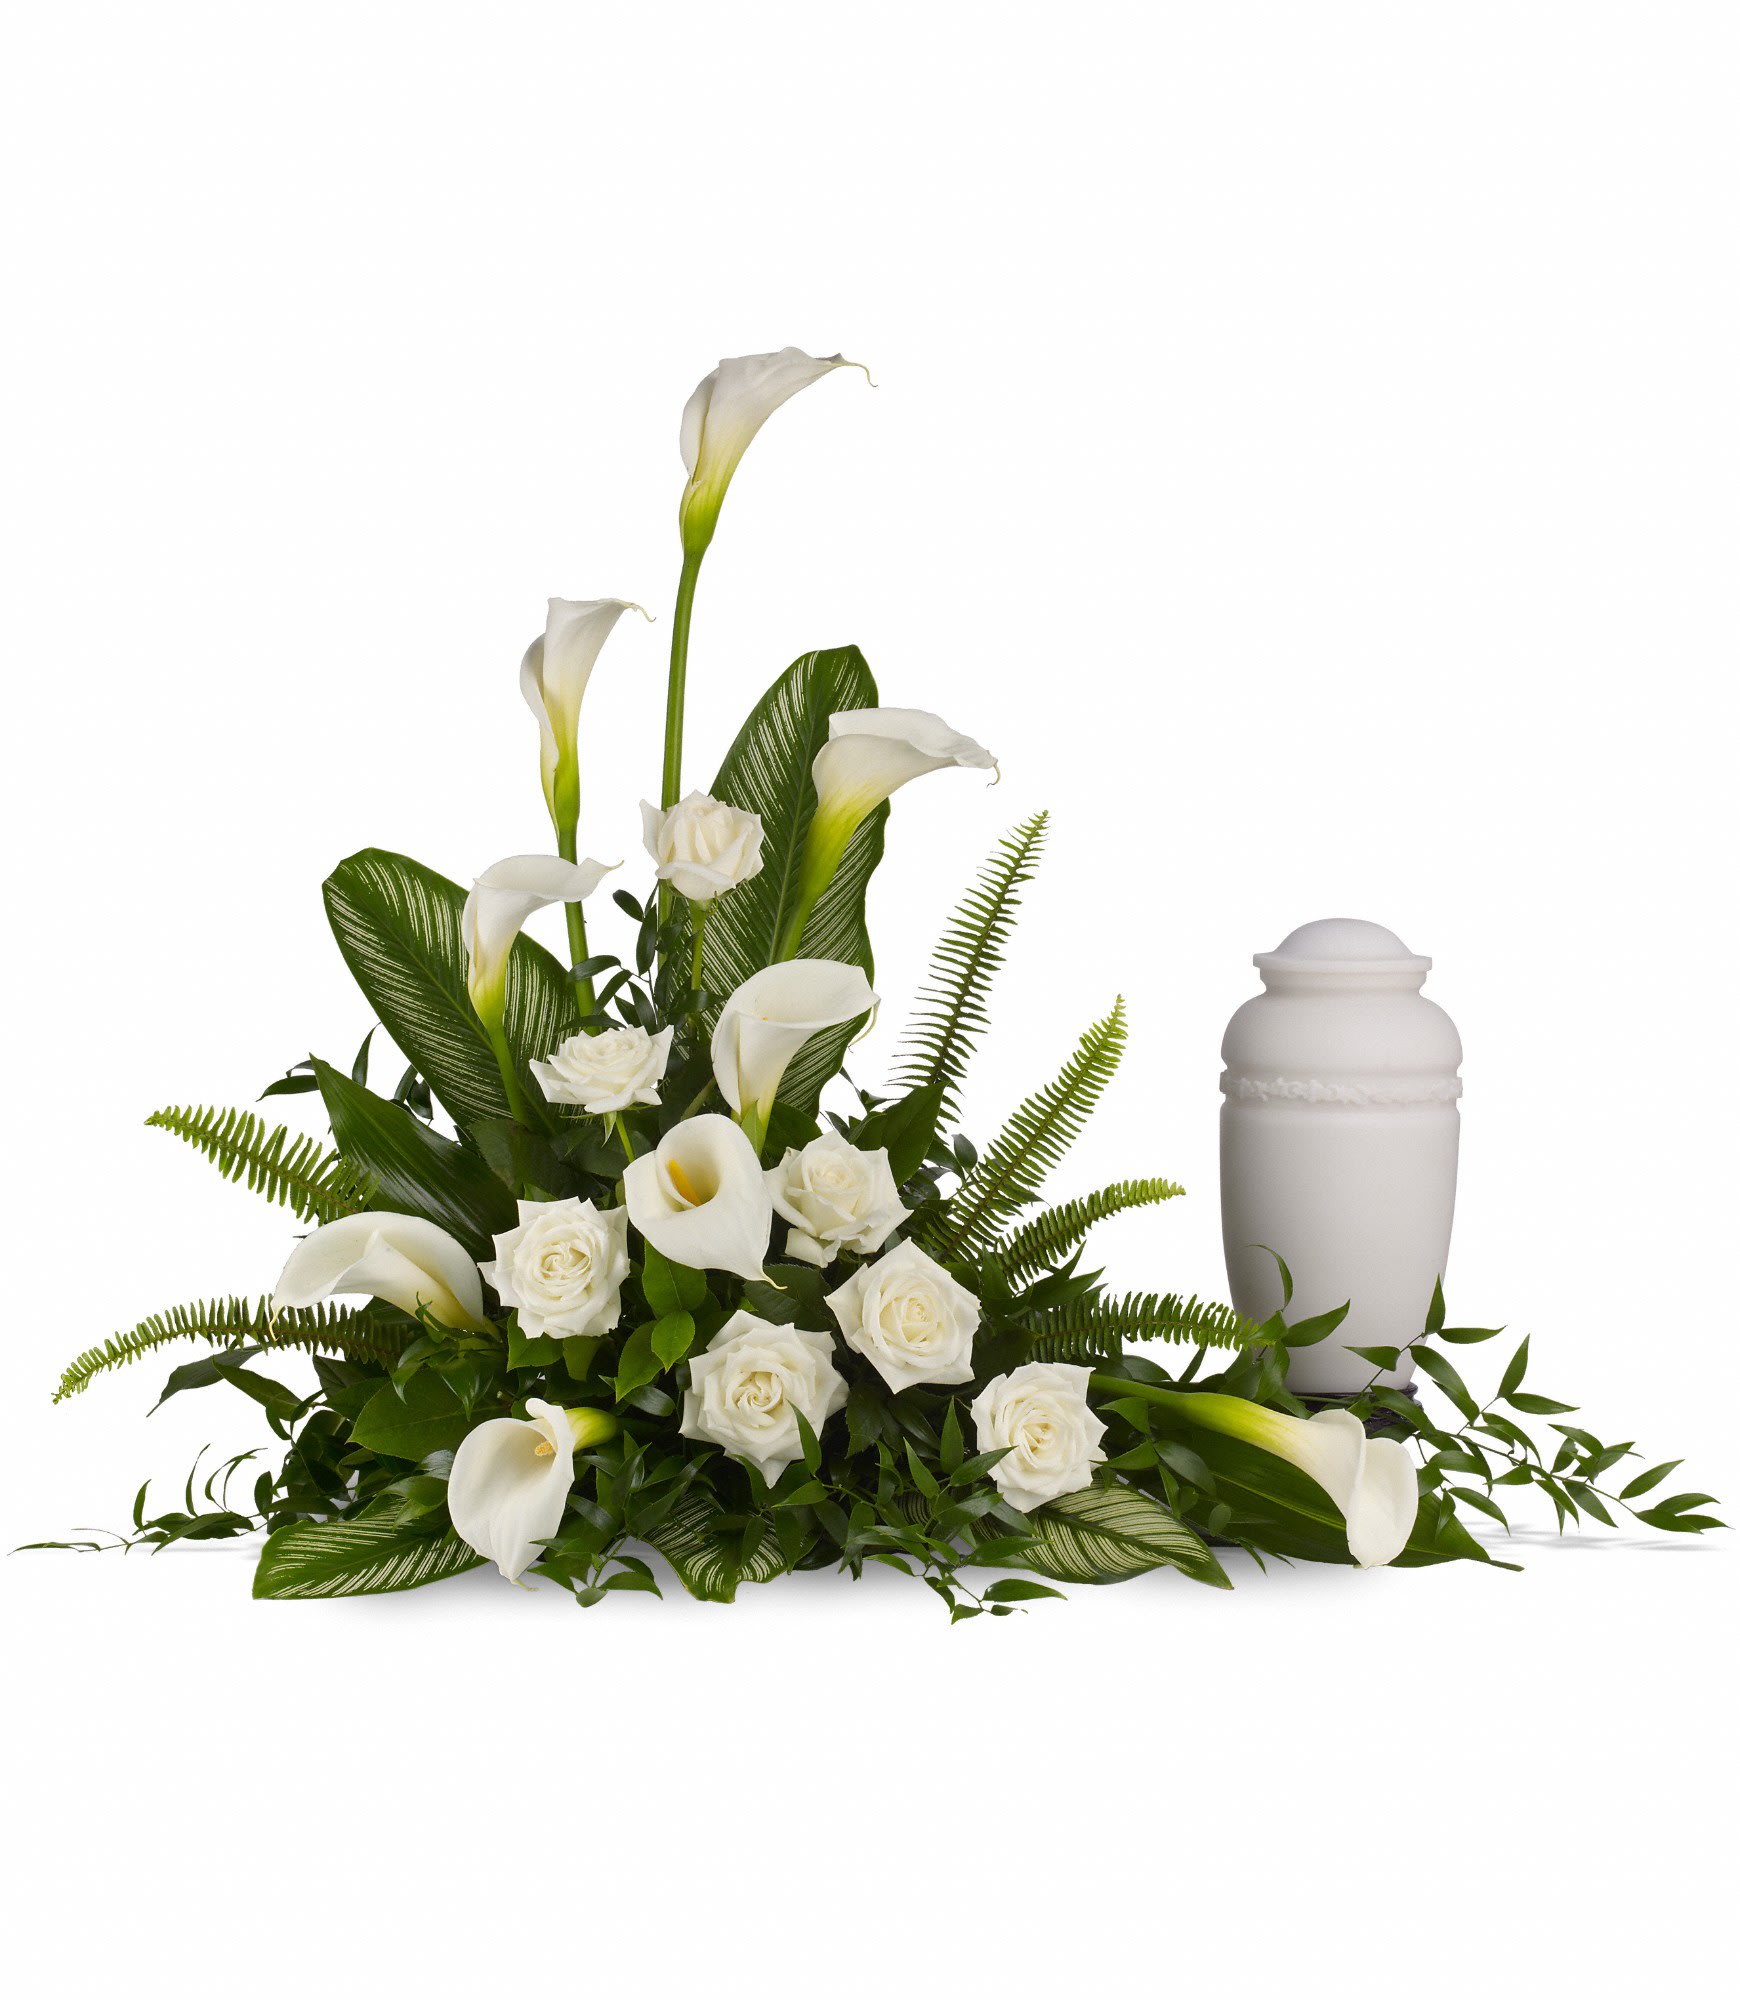 Stately Lilies Cremation Tribute - These beautiful, all white flowers touch hearts with their peaceful beauty. Place the spray on a table next to an urn, guest book or collection of framed photographs as a graceful tribute. T217-1A